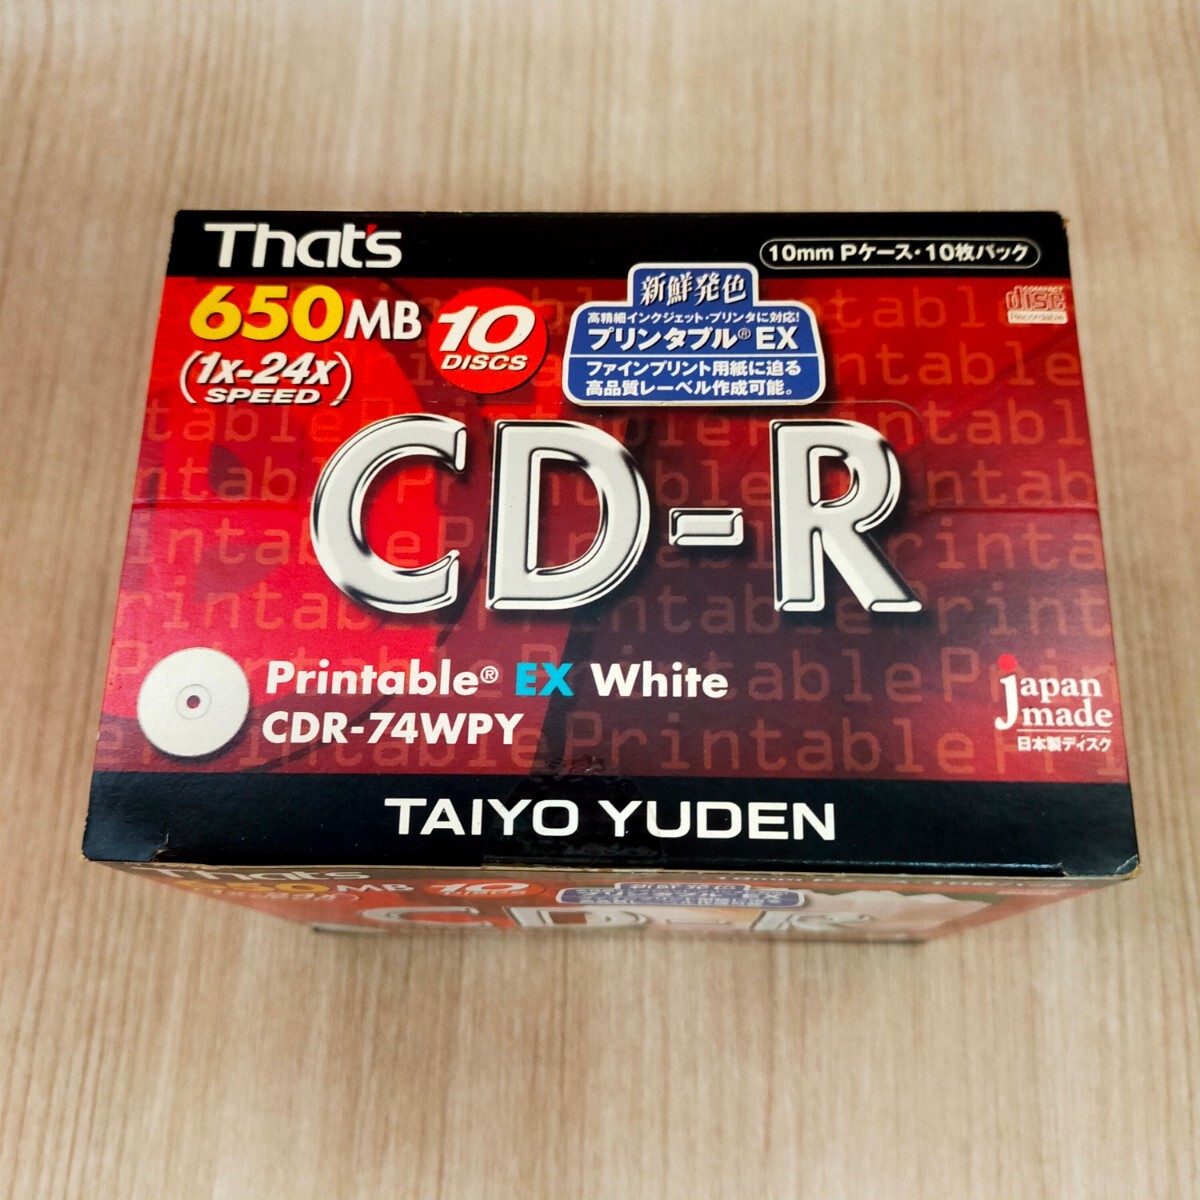  sun . electro- CD-R That\'s CDR-74WPY 650MB 10DISCS data for printer bru made in Japan 1~24 speed TAIYO YUDEN [ unopened goods ] rare that time thing 